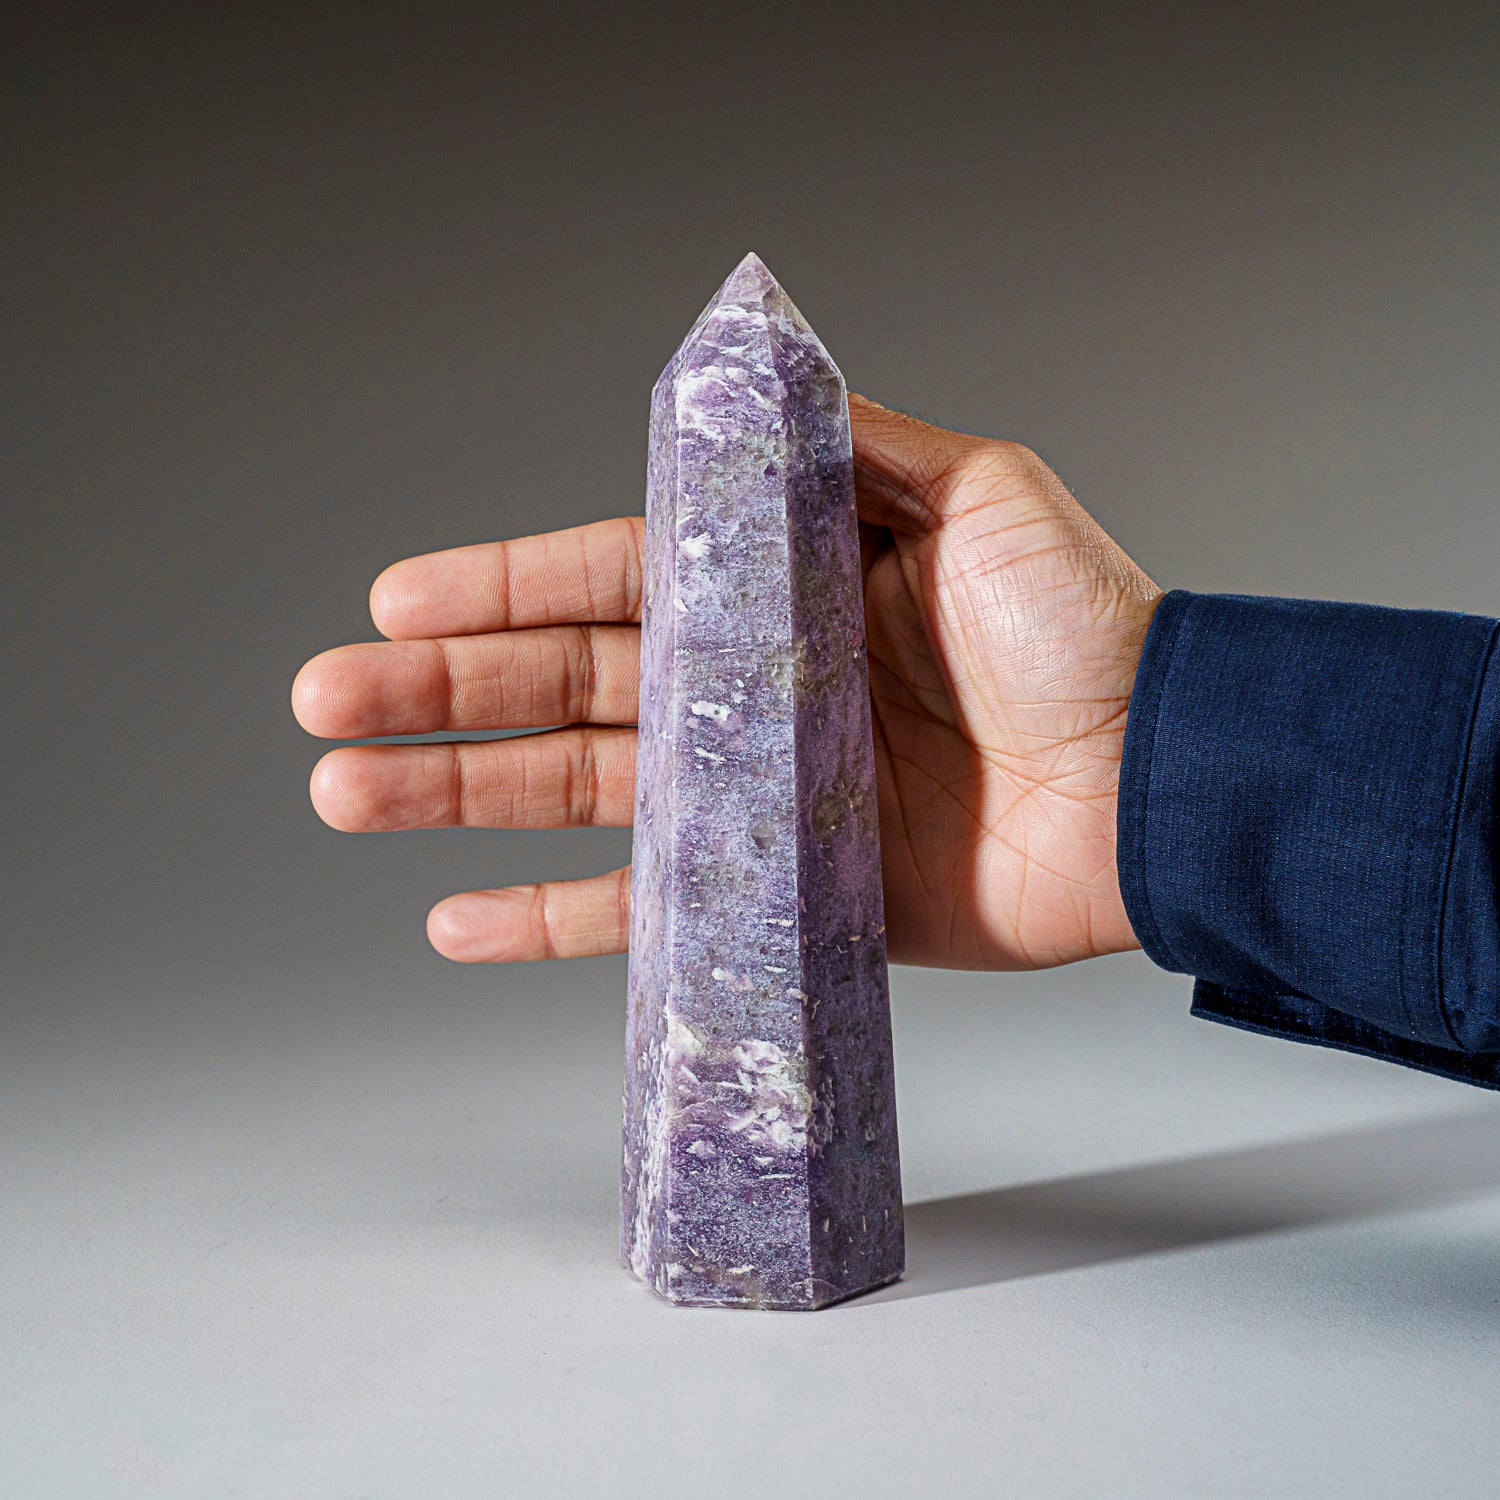 Genuine Polished Lepidolite Point from Madagascar (1.6 lbs)